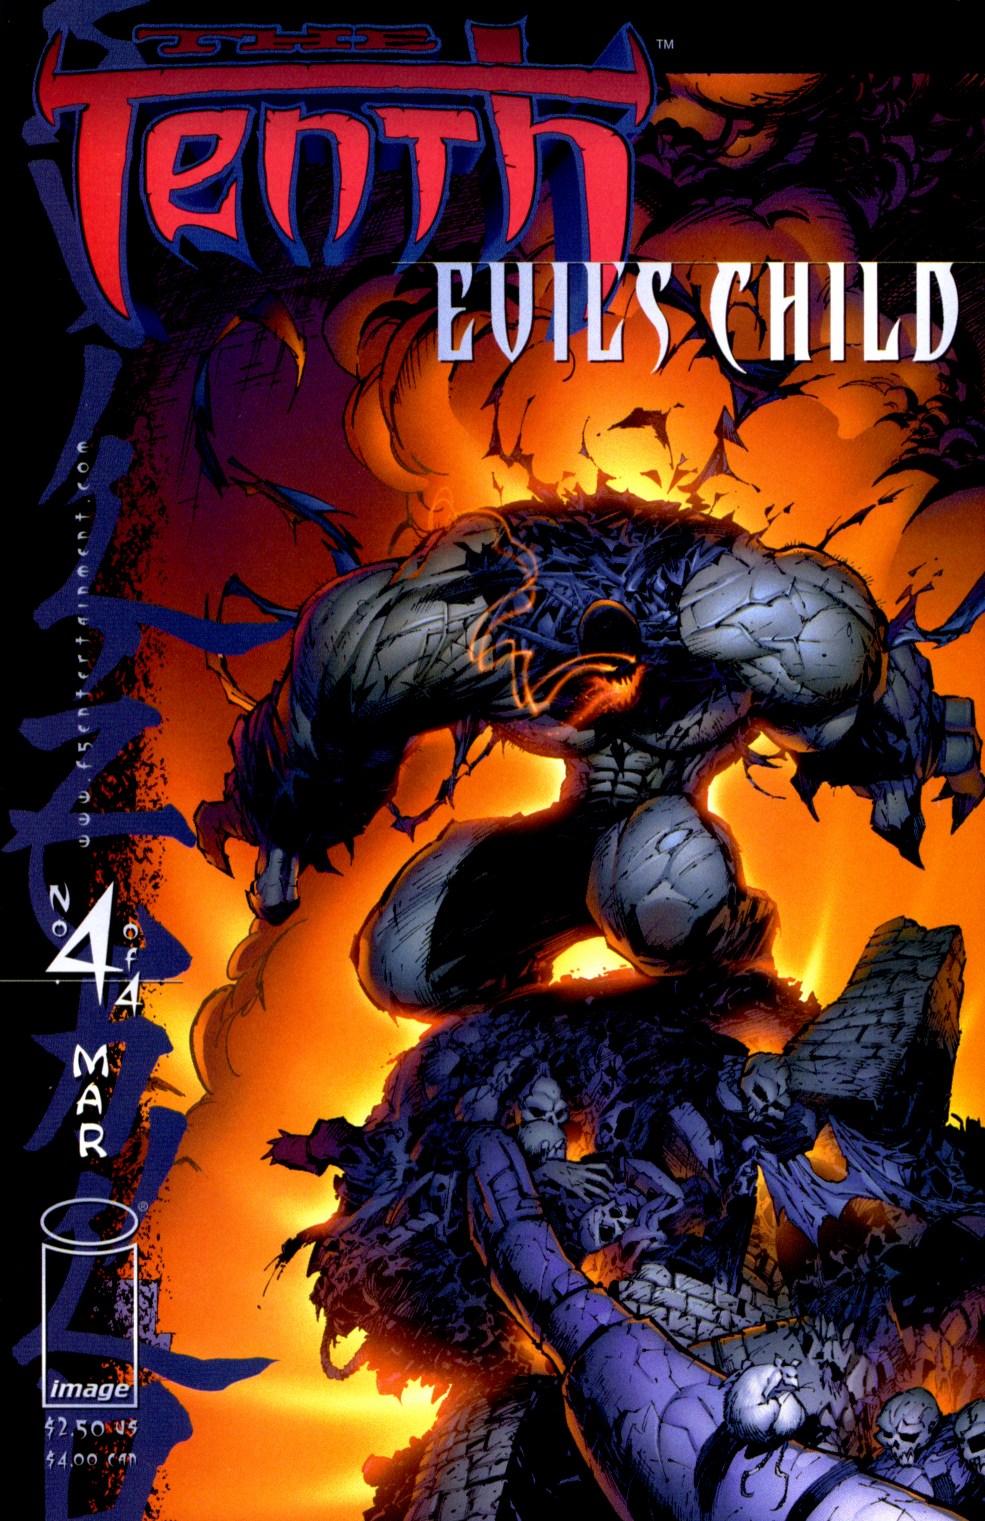 Read online The Tenth: Evil's Child comic -  Issue #4 - 1